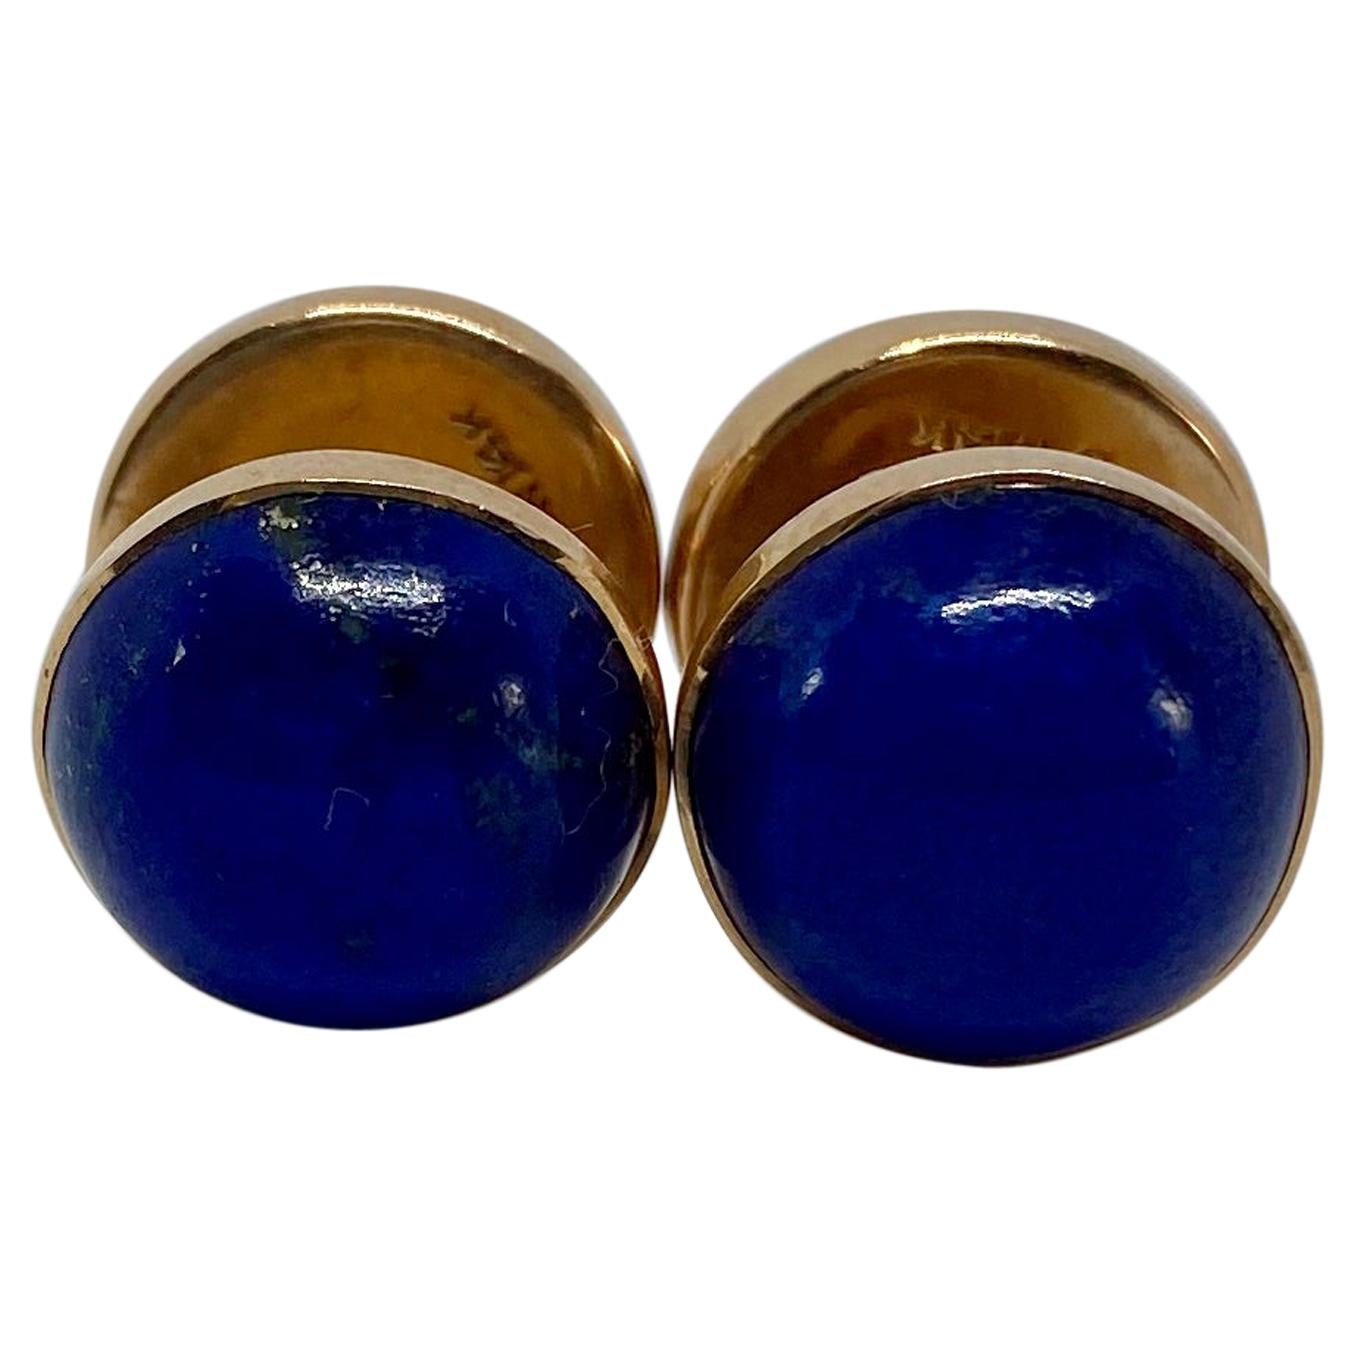 Art Deco "Spool" Cufflinks in Yellow Gold and Lapis by Sansbury & Nellis